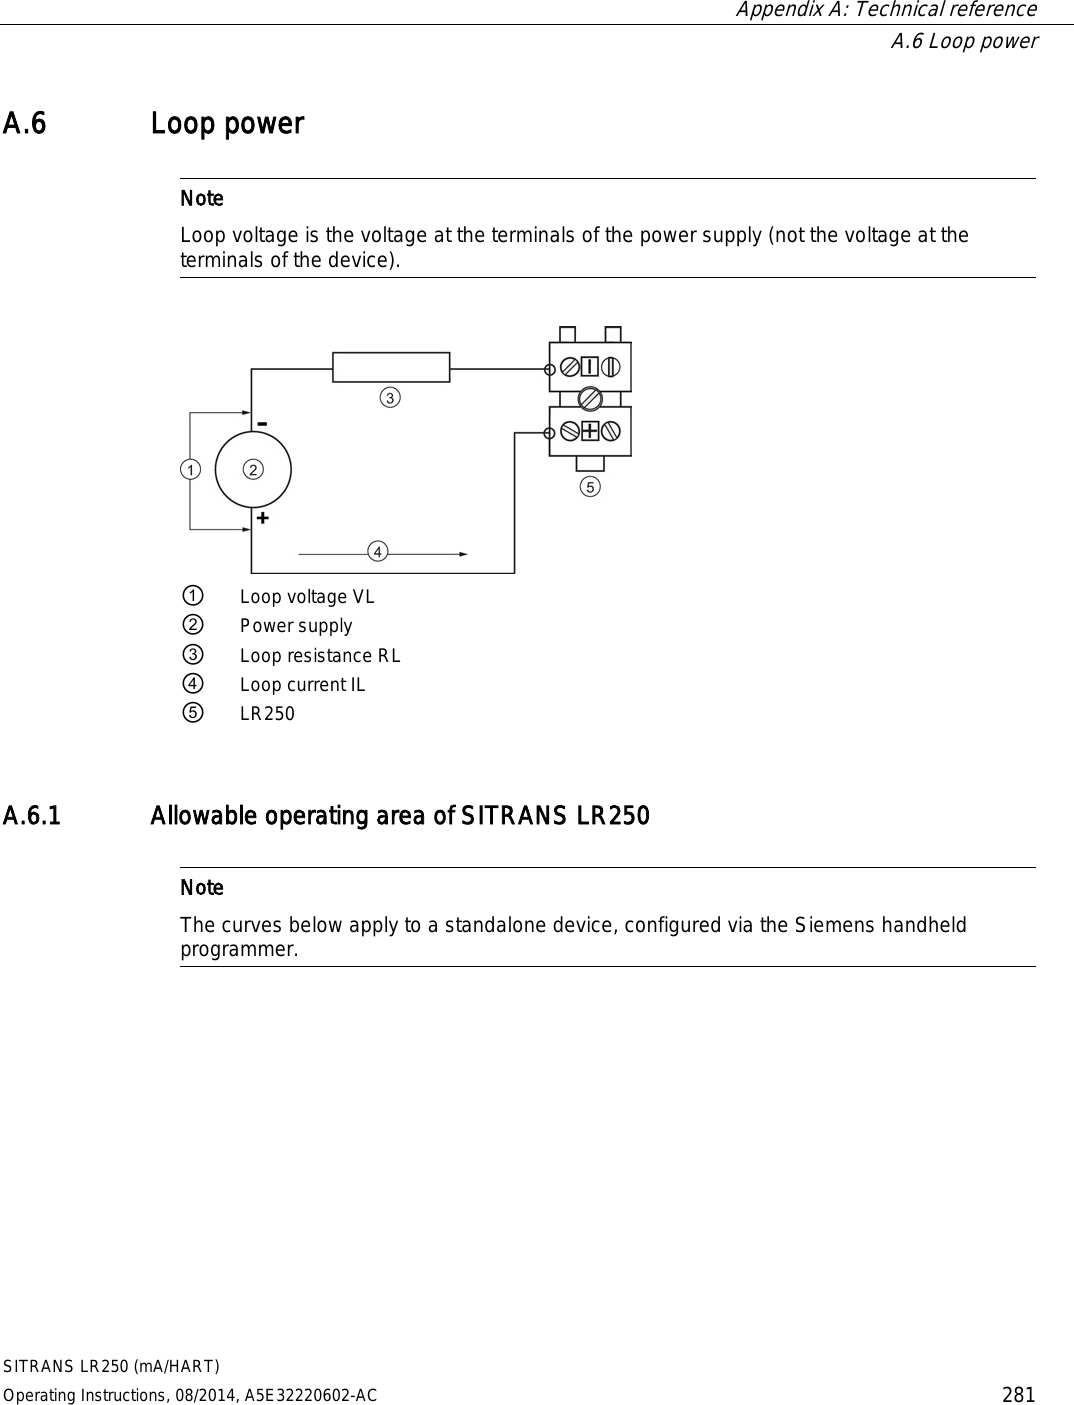  Appendix A: Technical reference  A.6 Loop power SITRANS LR250 (mA/HART) Operating Instructions, 08/2014, A5E32220602-AC 281 A.6 Loop power   Note Loop voltage is the voltage at the terminals of the power supply (not the voltage at the terminals of the device).   ① Loop voltage VL ② Power supply ③ Loop resistance RL ④ Loop current IL ⑤ LR250 A.6.1 Allowable operating area of SITRANS LR250   Note The curves below apply to a standalone device, configured via the Siemens handheld programmer.  